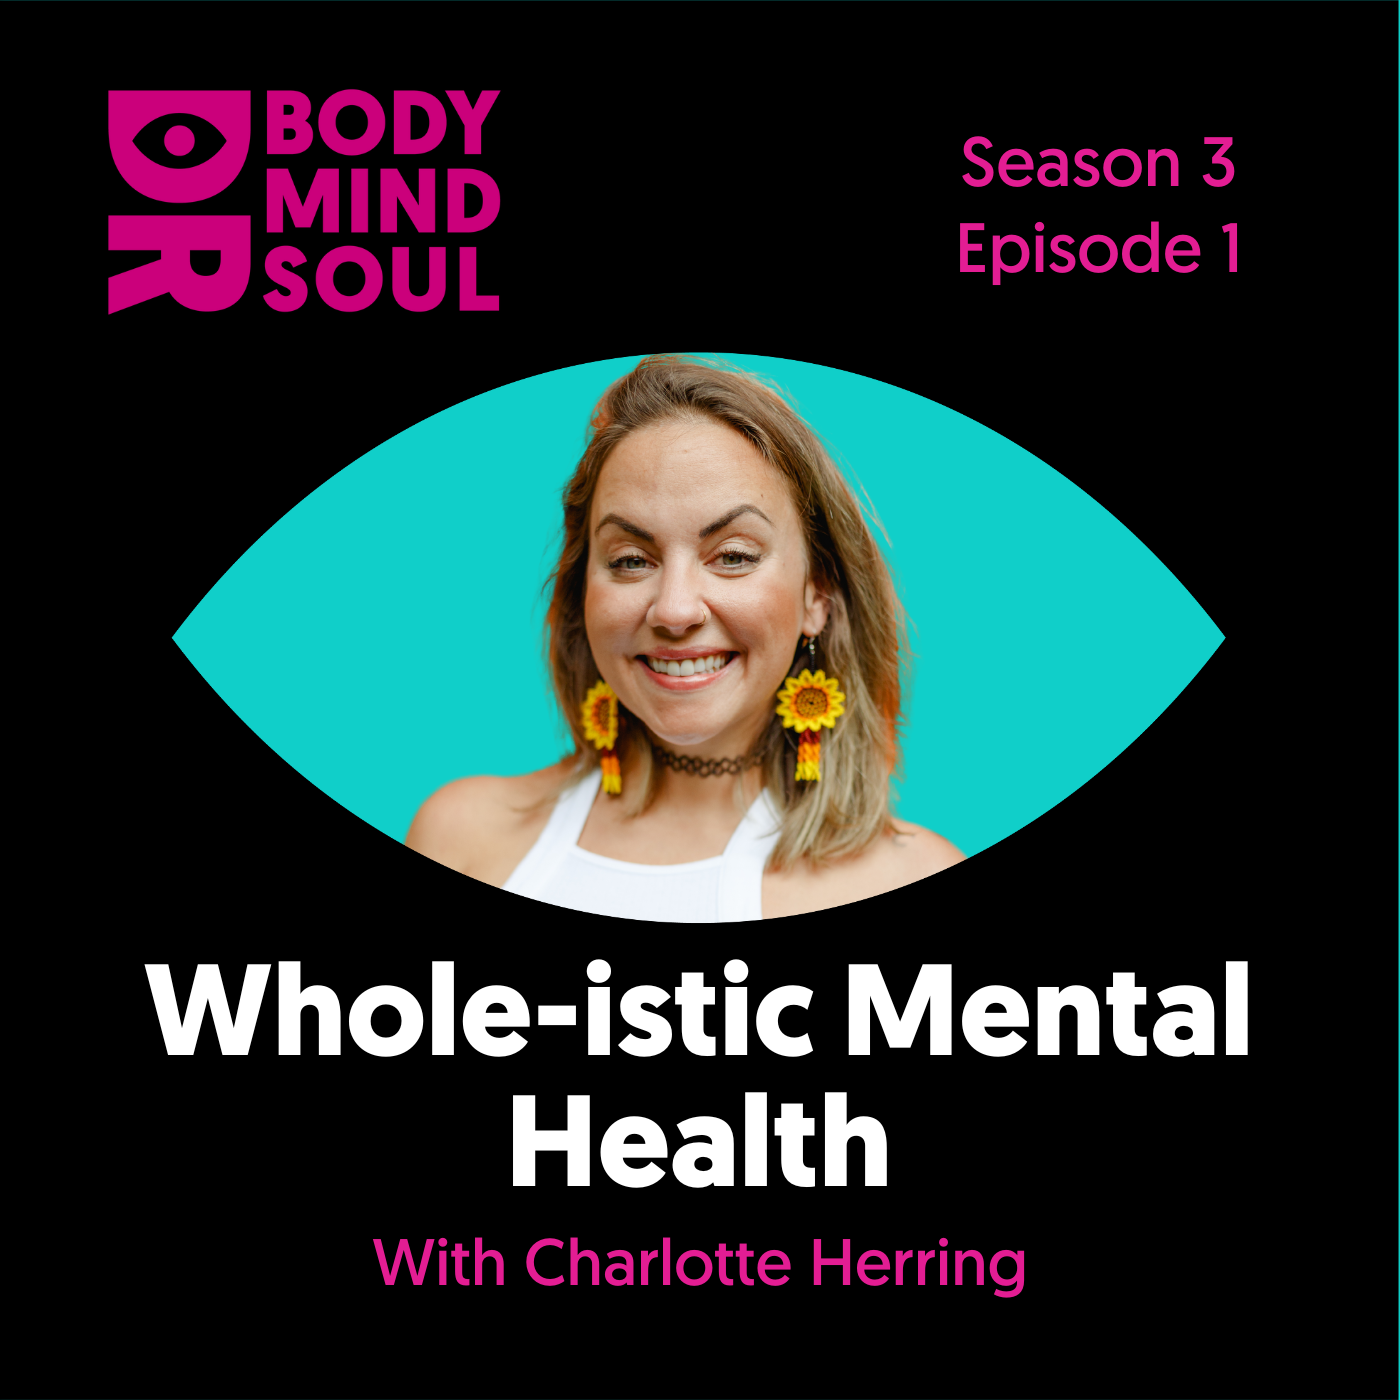 Whole-istic Mental Health with Charlotte Herring